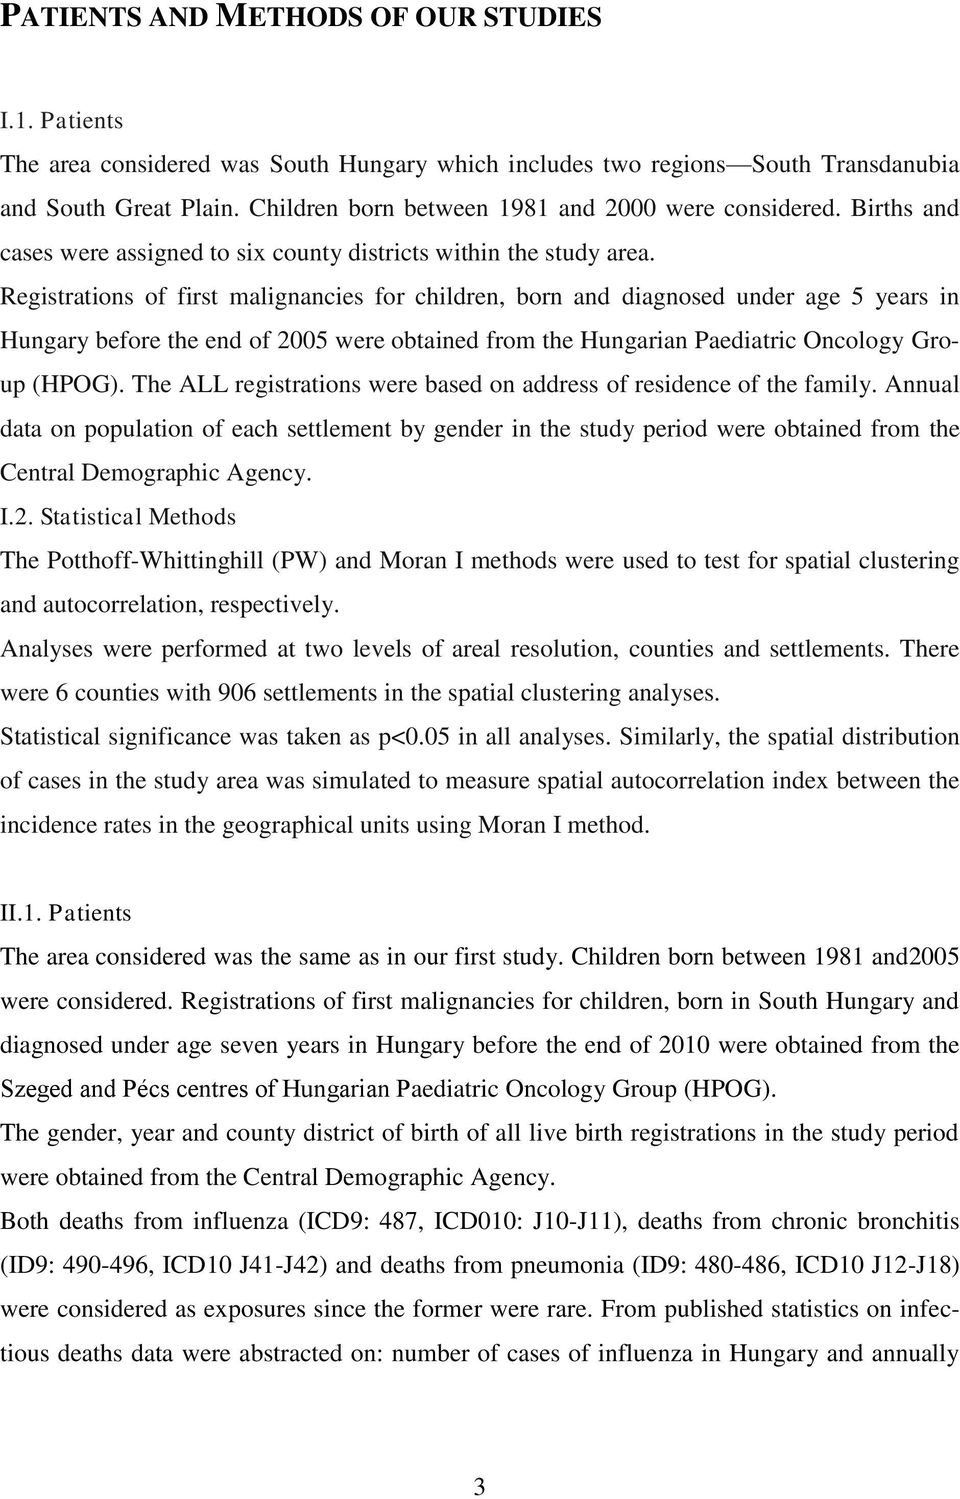 Registrations of first malignancies for children, born and diagnosed under age 5 years in Hungary before the end of 2005 were obtained from the Hungarian Paediatric Oncology Group (HPOG).